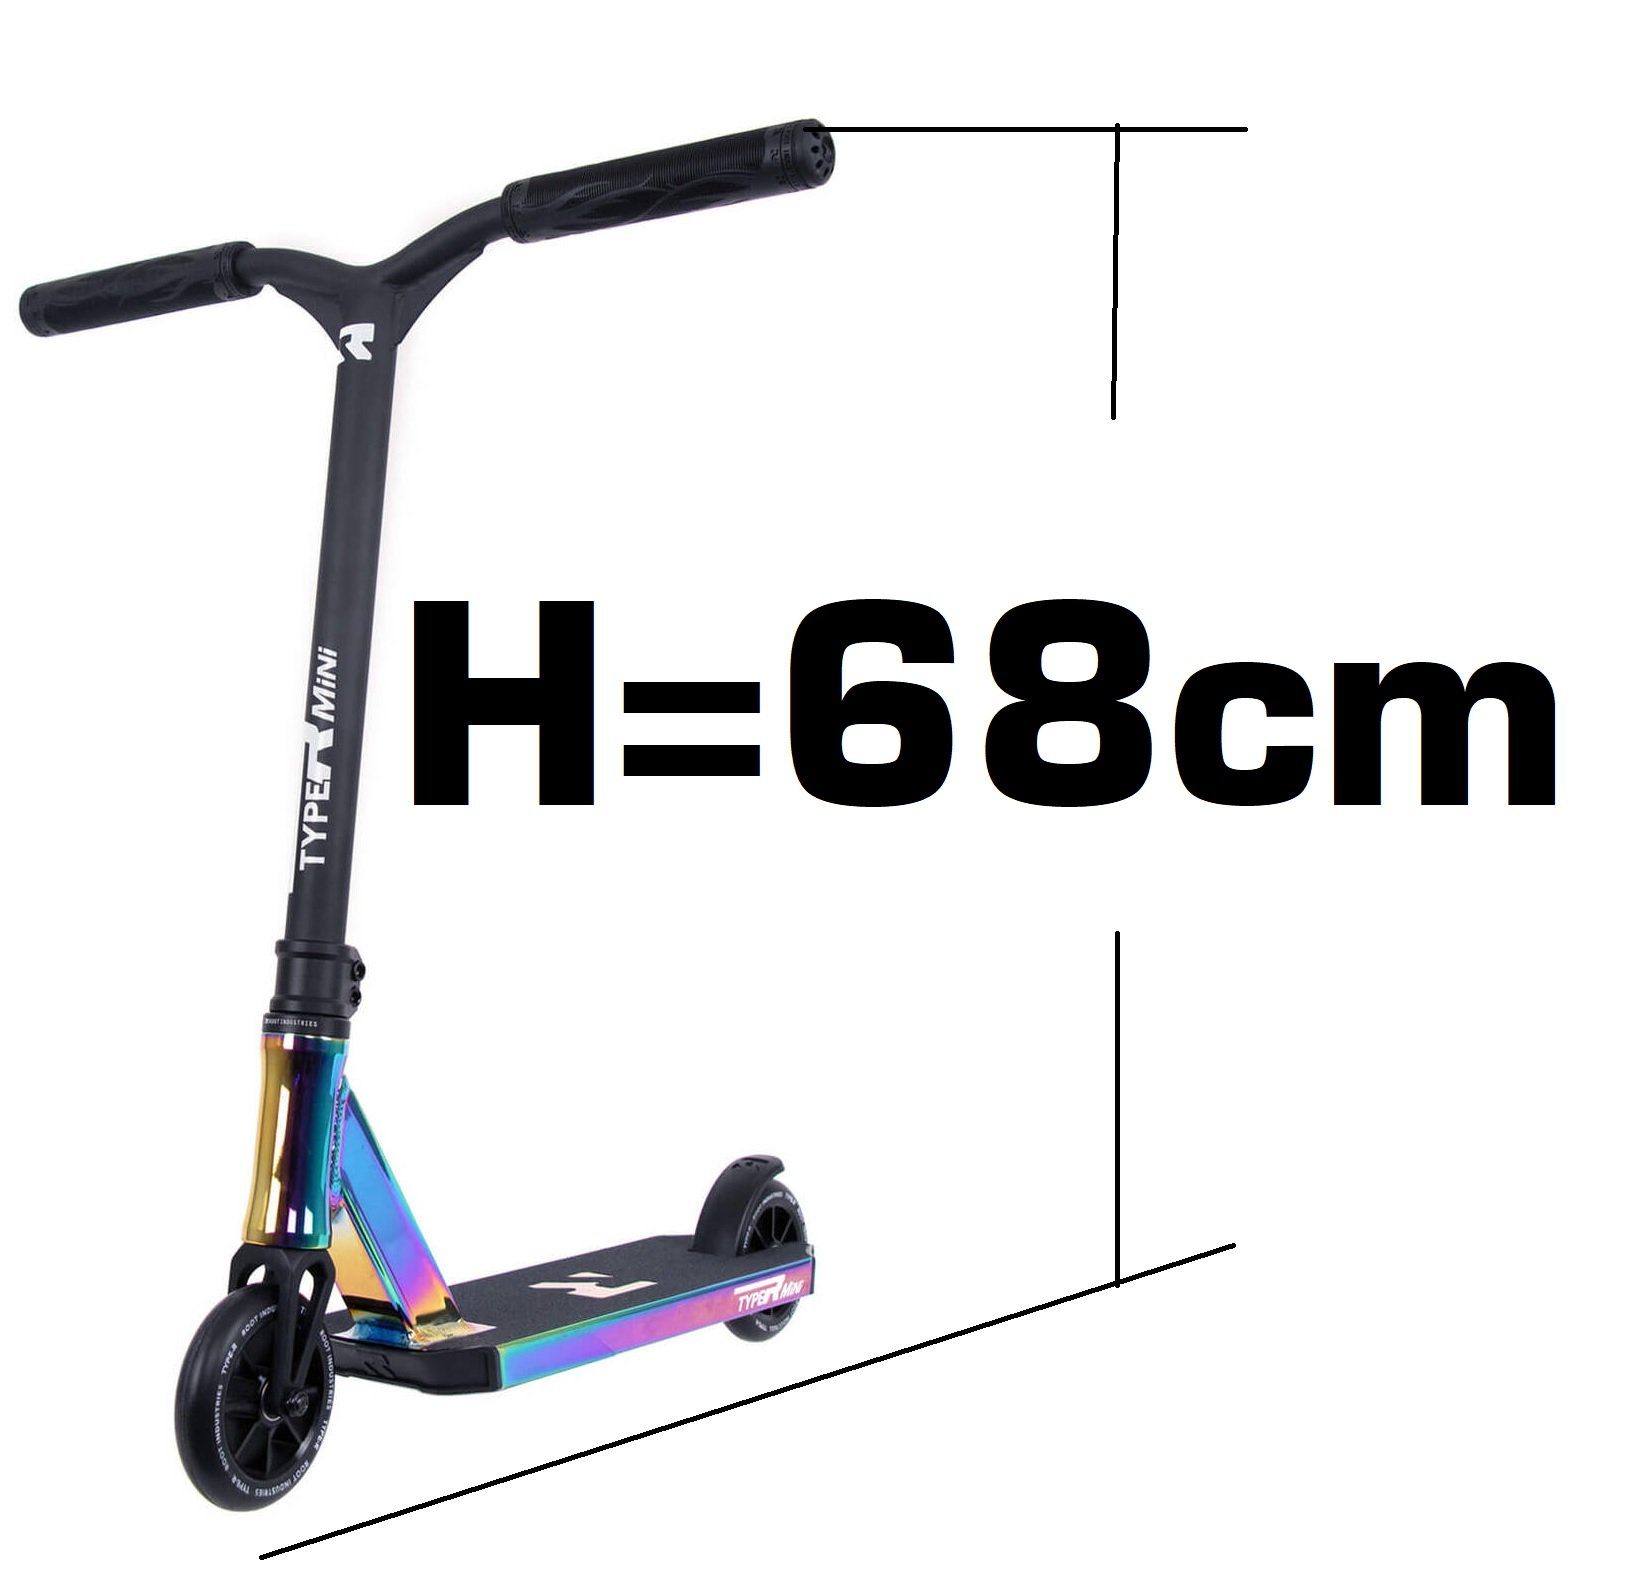 Root Industries Neochrom Stunt-Scooter Industries Stuntscooter Mini H=68cm R Type Root